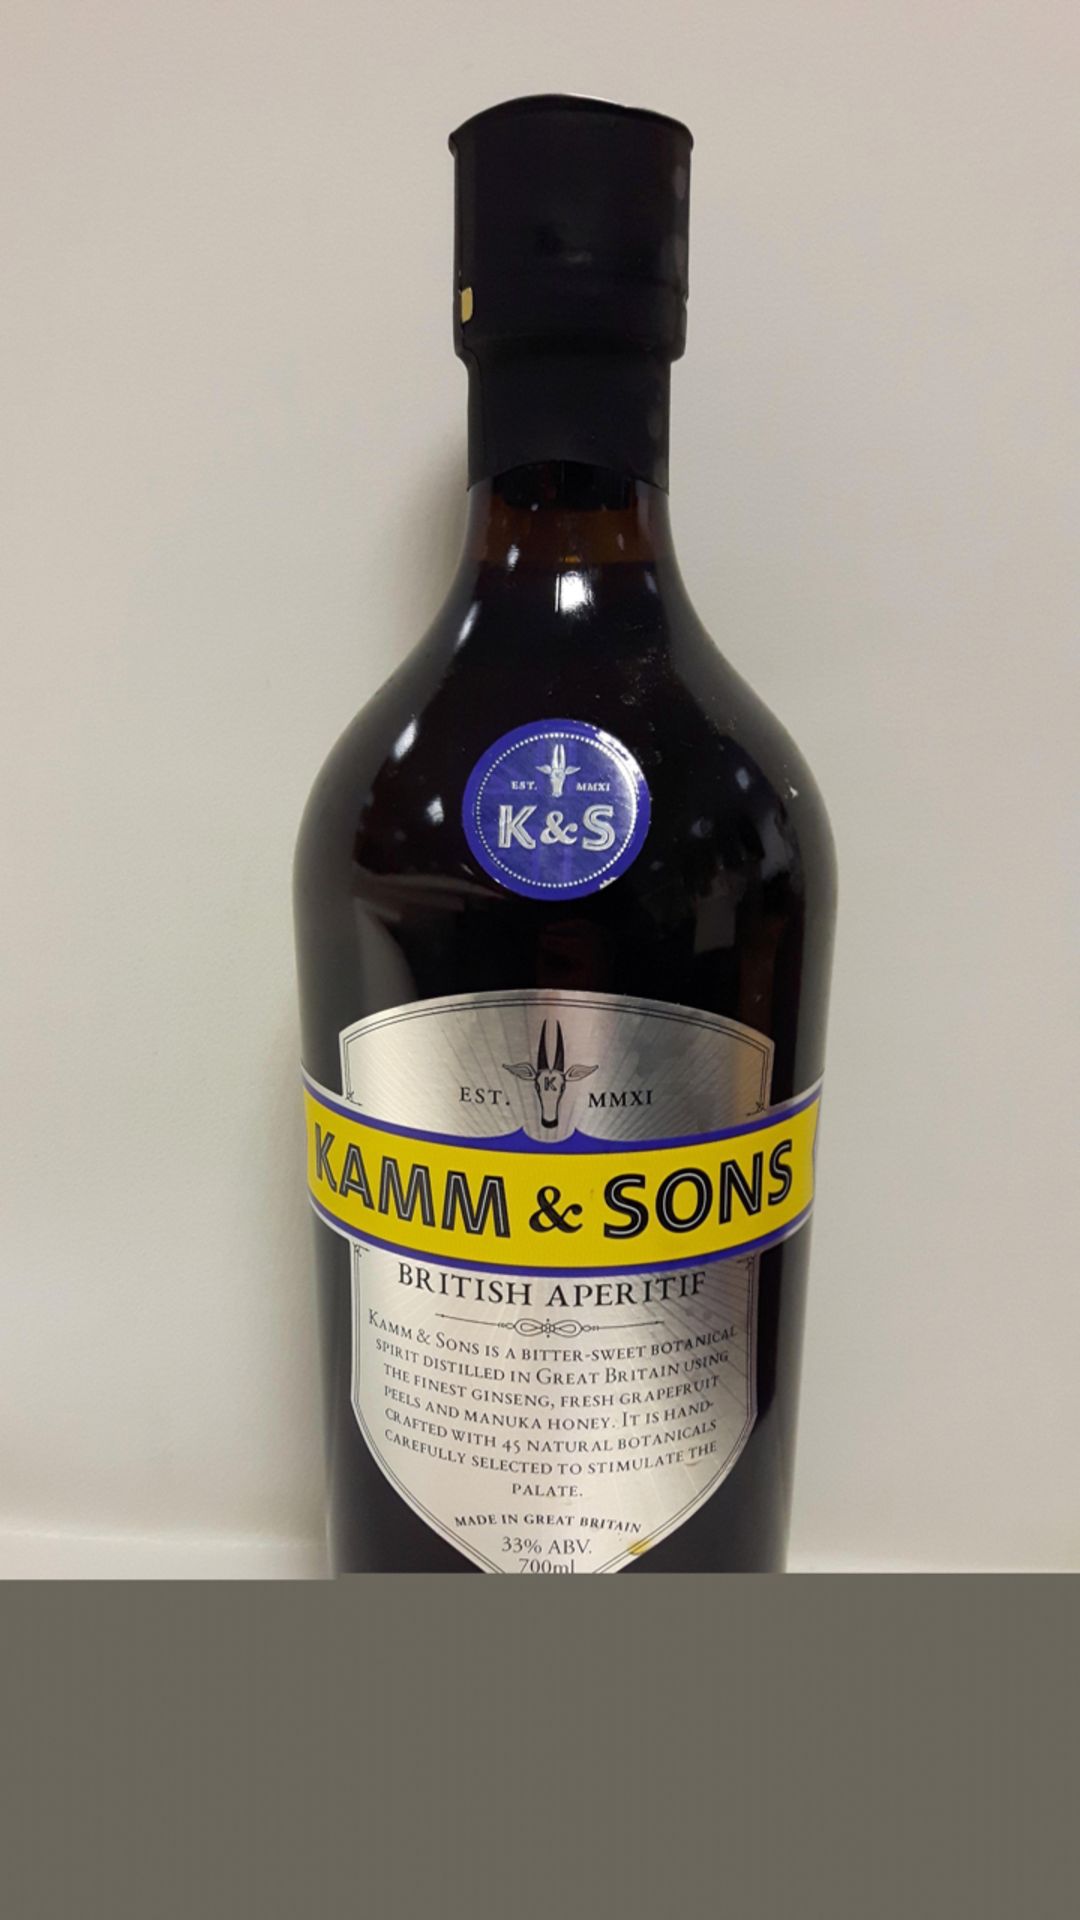 A bottle of Kamm & Sons The British Aperitif.